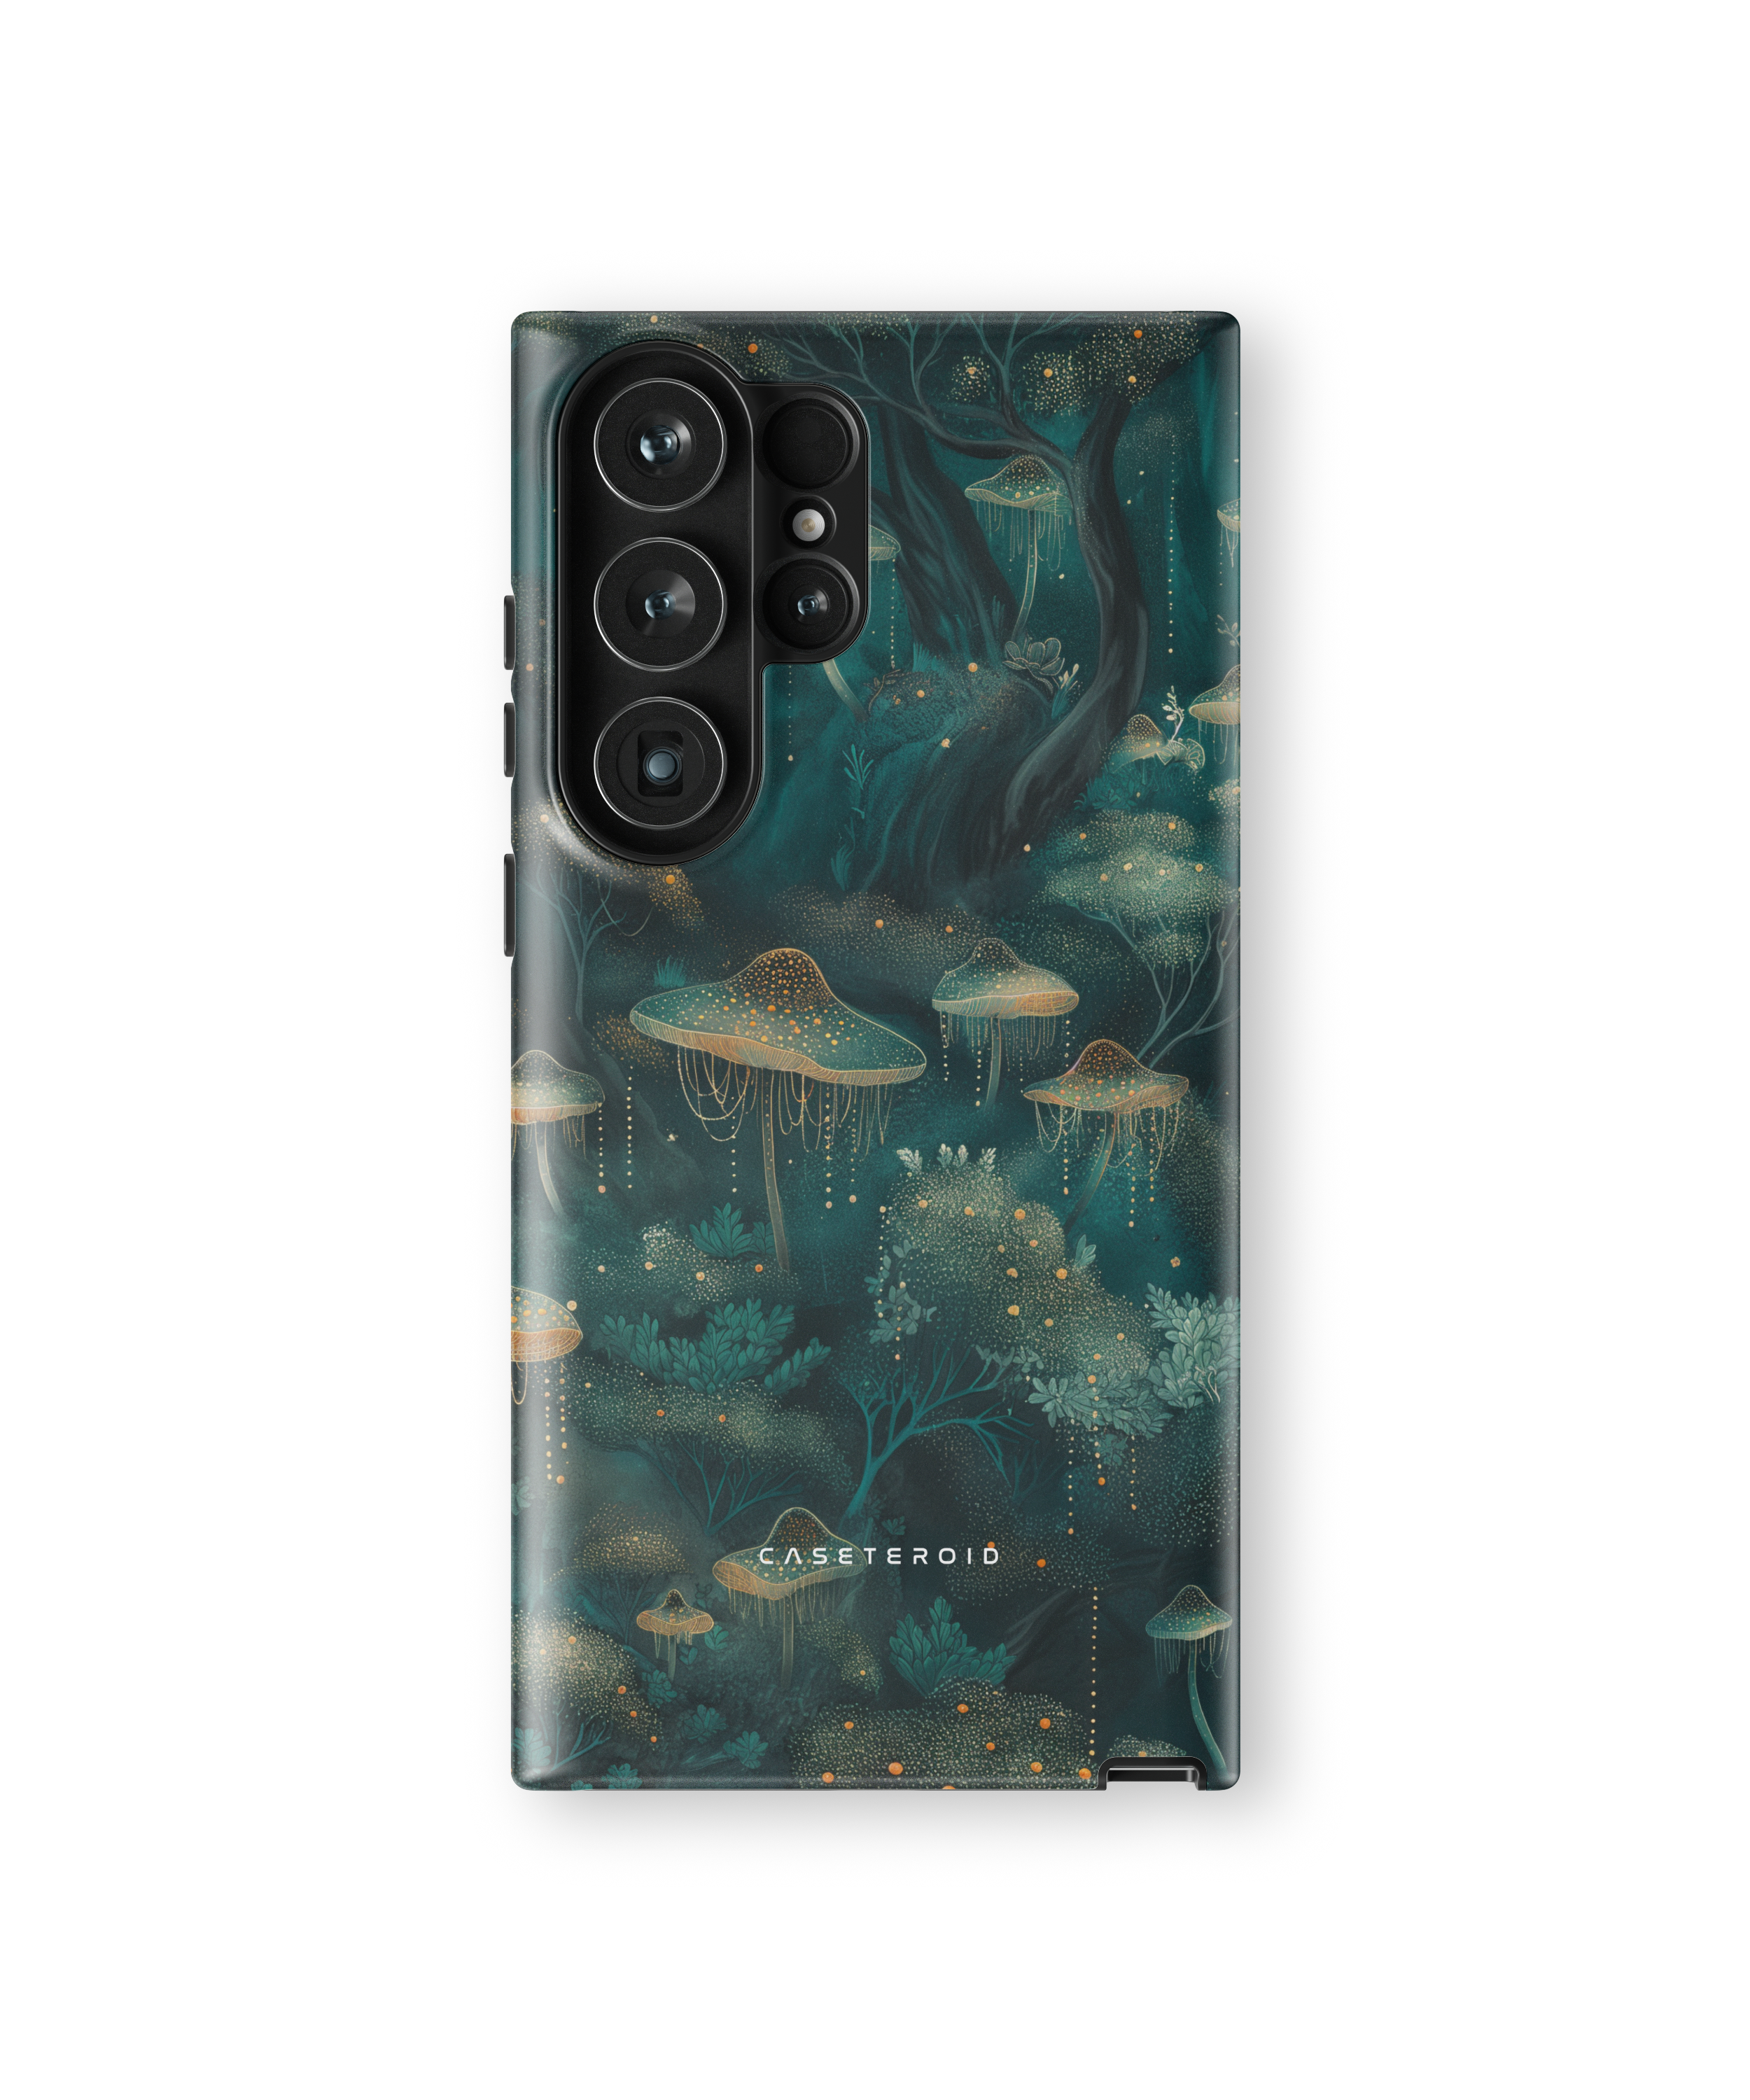 Samsung Tough Case - Mystic Woodland Whispers - CASETEROID